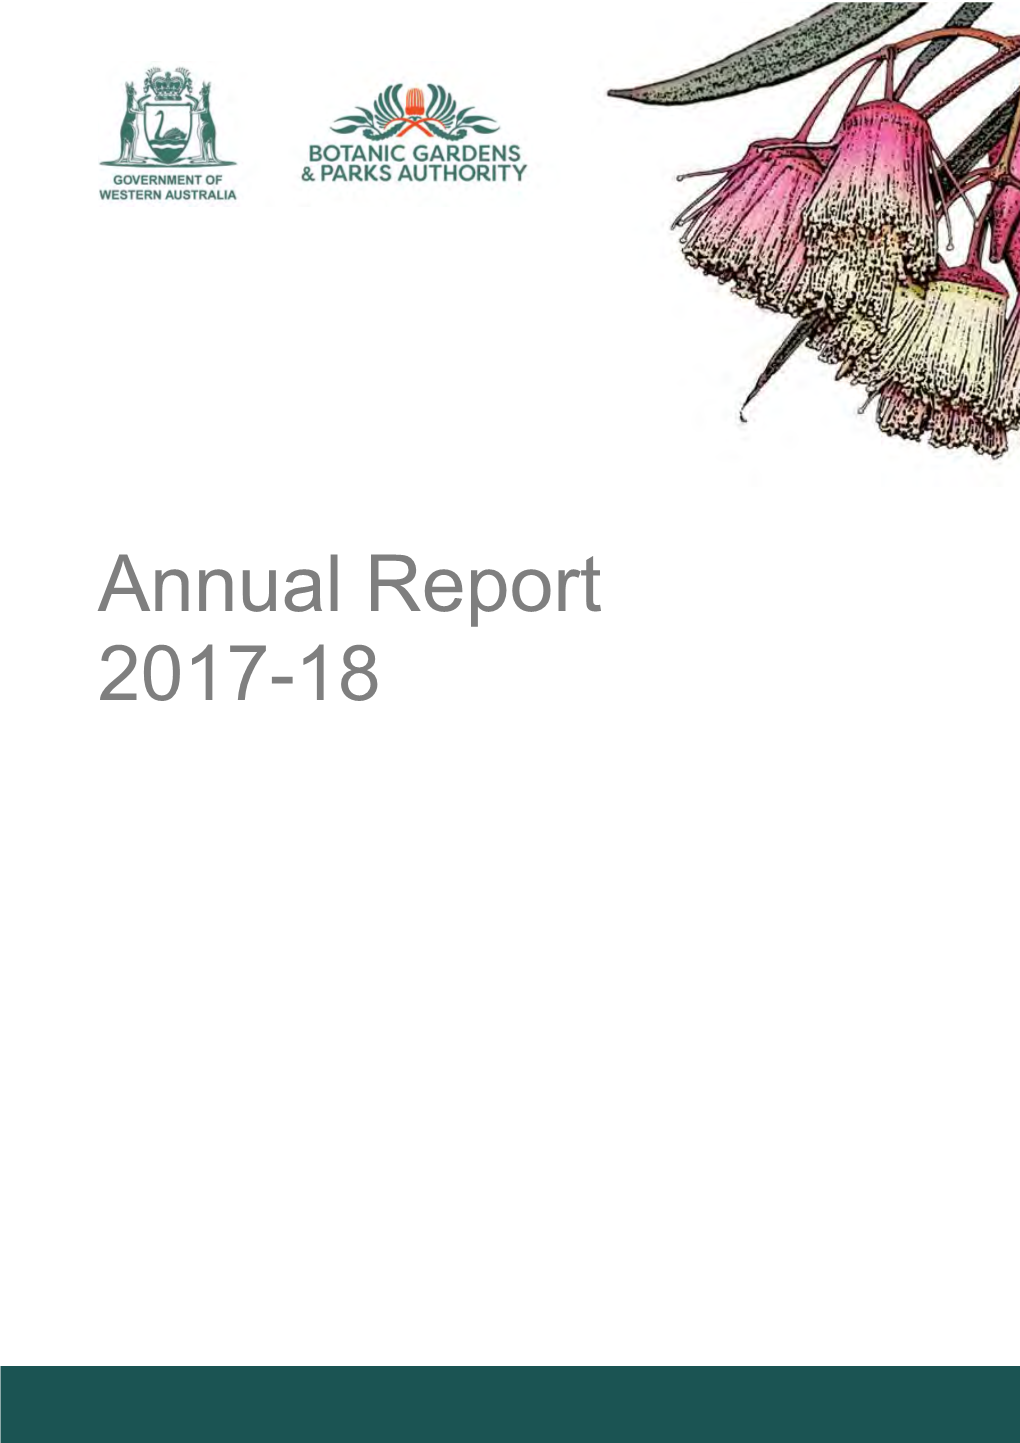 Botanic Gardens and Parks Authority Annual Report 2017-18 I